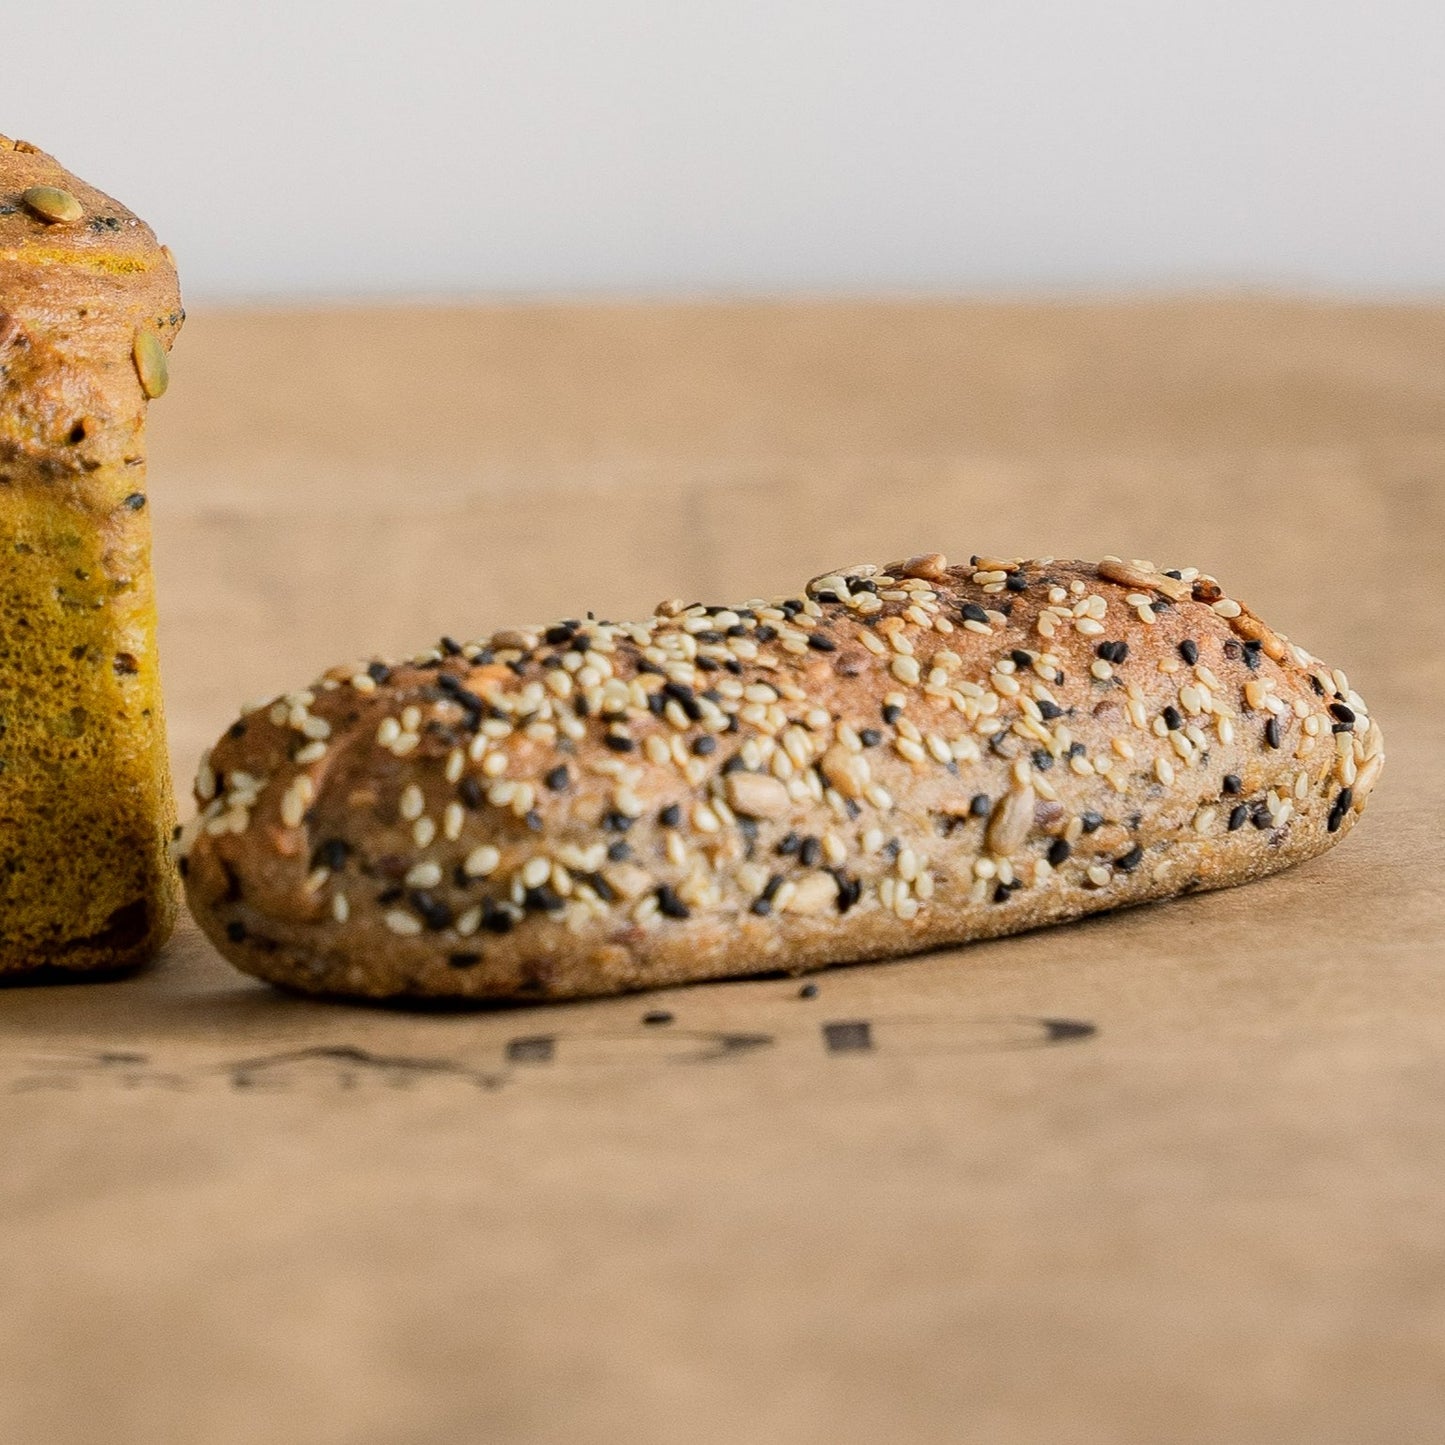 Gluten free baguette topped up with different grains.